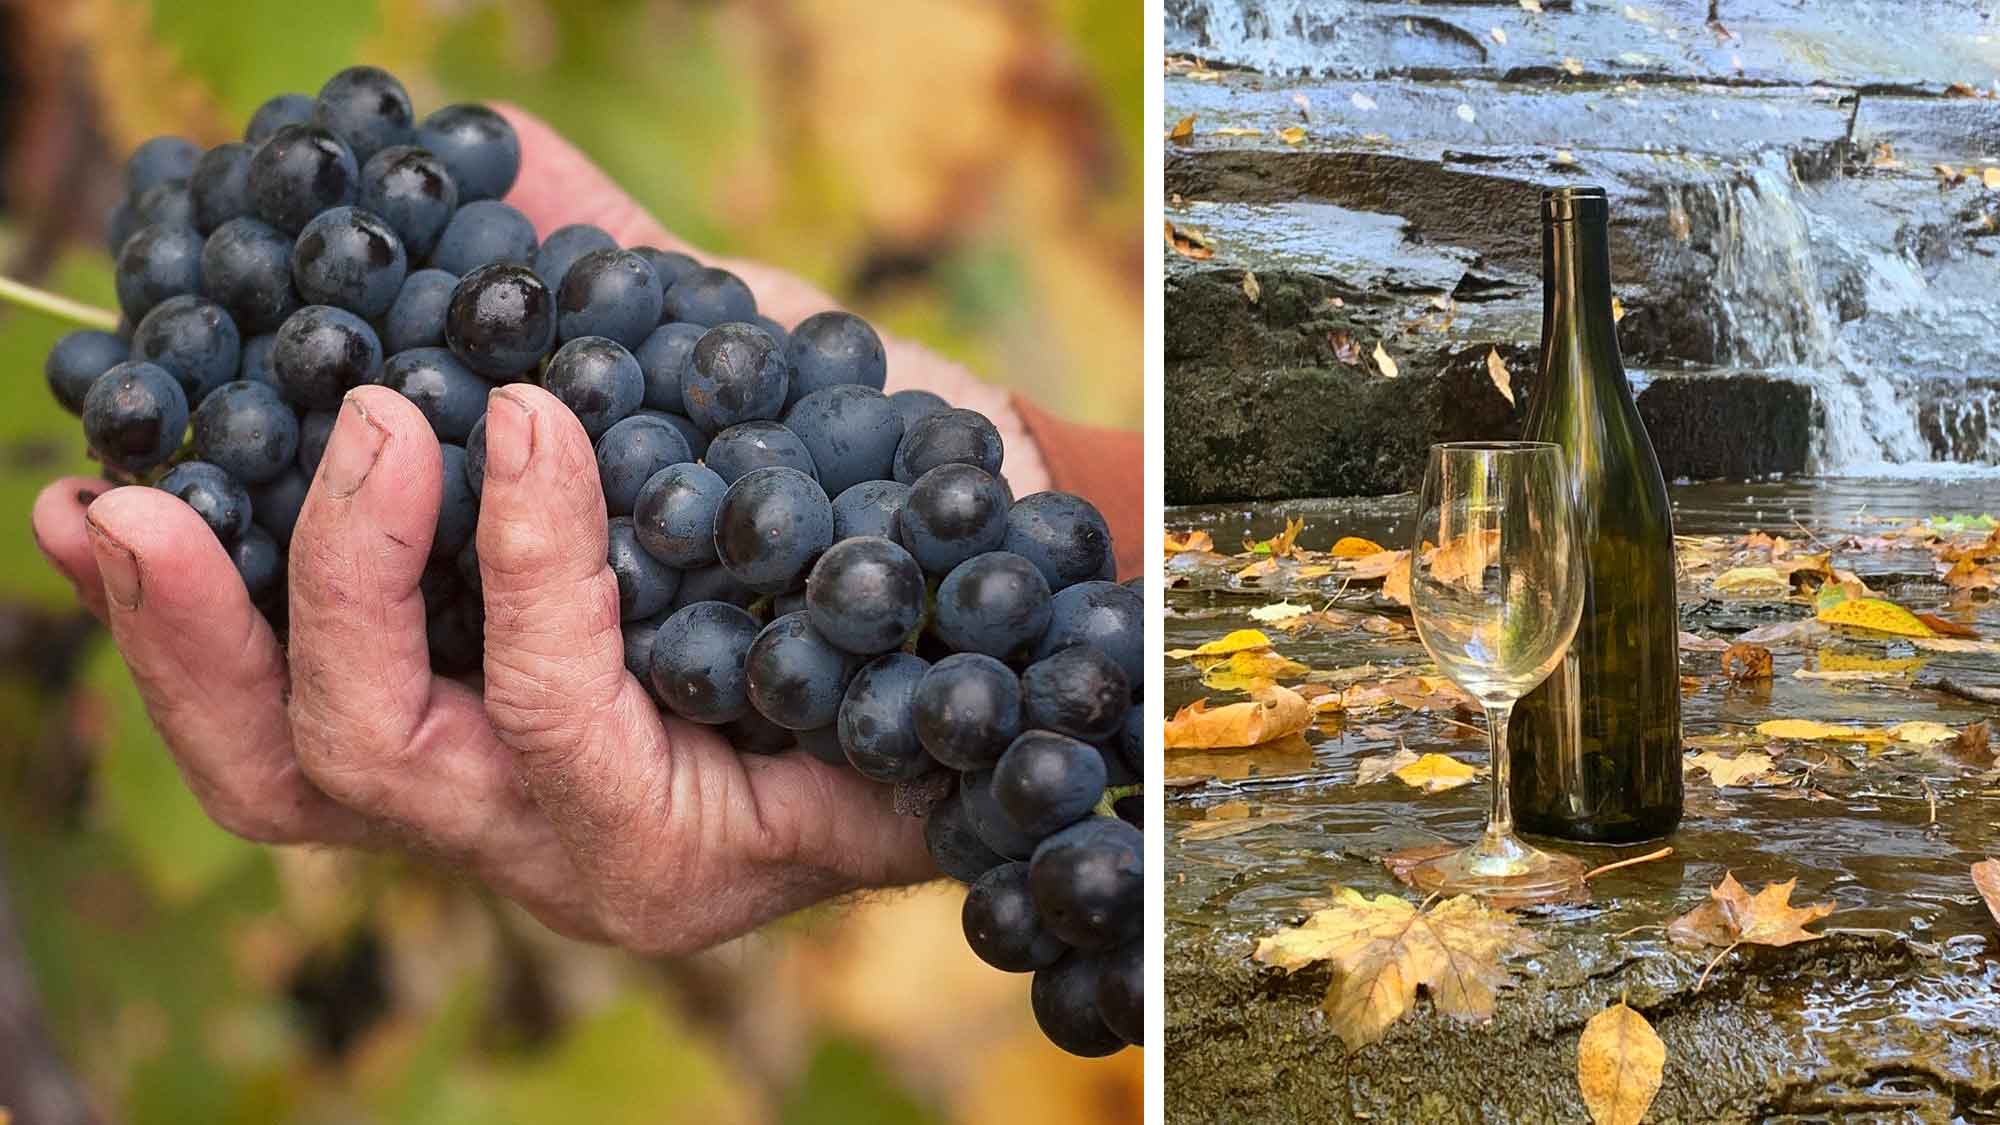 Photographs of a hand holding wine grapes and a bottle of wine and wine glass in front of a waterfall.